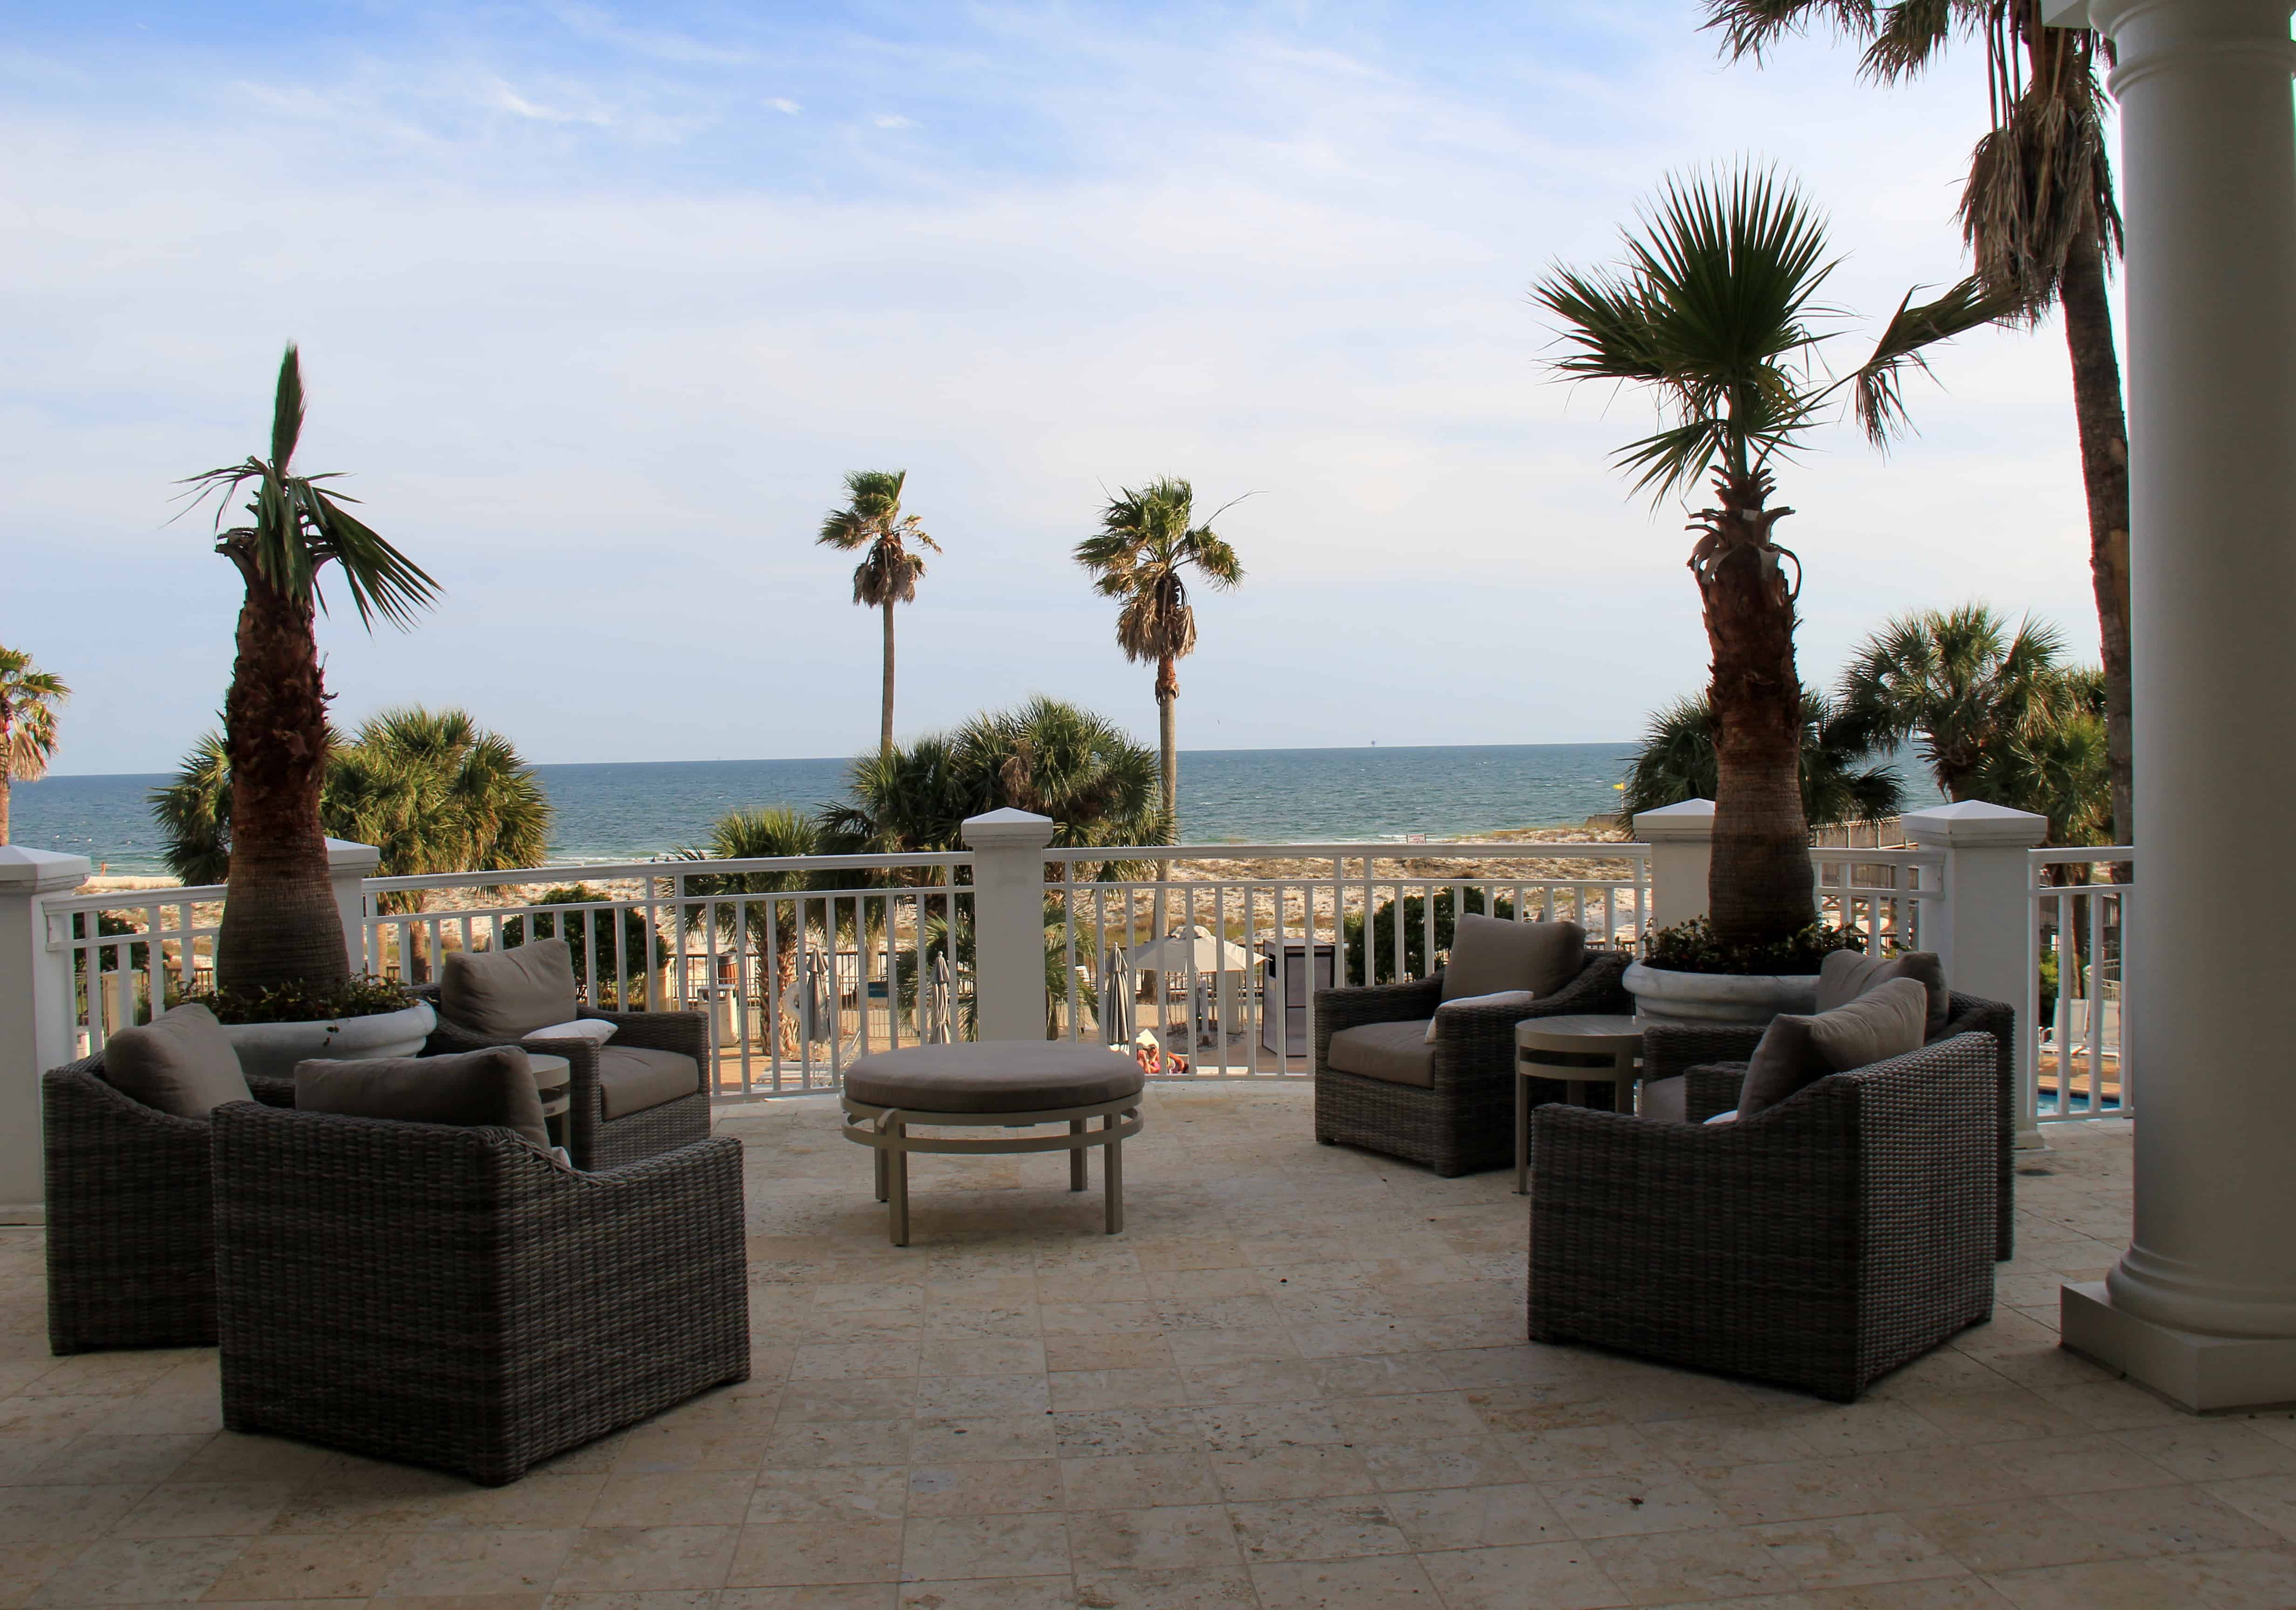 Open Area on Property to Sit and Relax at Beach Club Resort and Spa